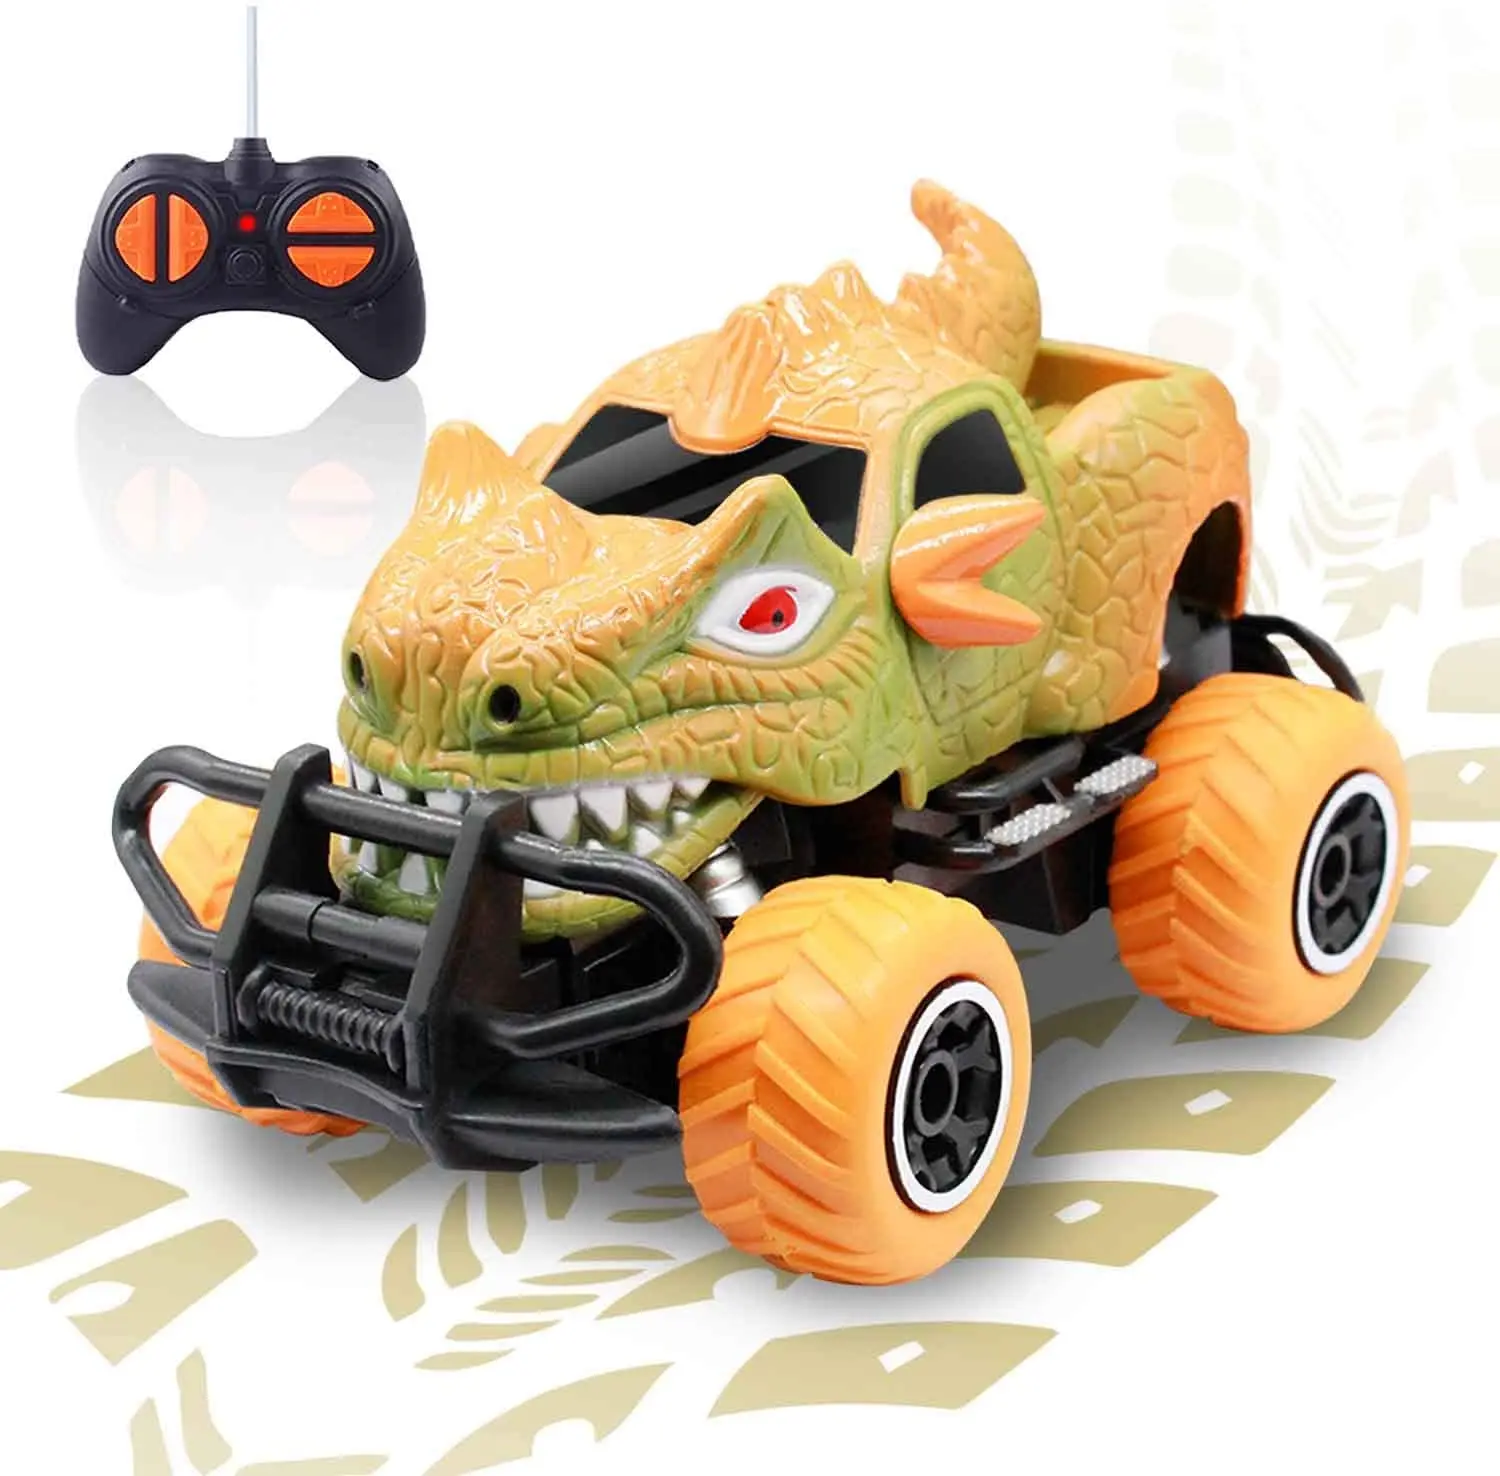 Rc Dinosaur Toys 4channel Remote Control Animal Toys Park Jurassic Toys For  Toddlers And Kids - Buy Dinosaur Toys,Toys Dinosaurs,Remote Control  Dinosaur Toys Product on 